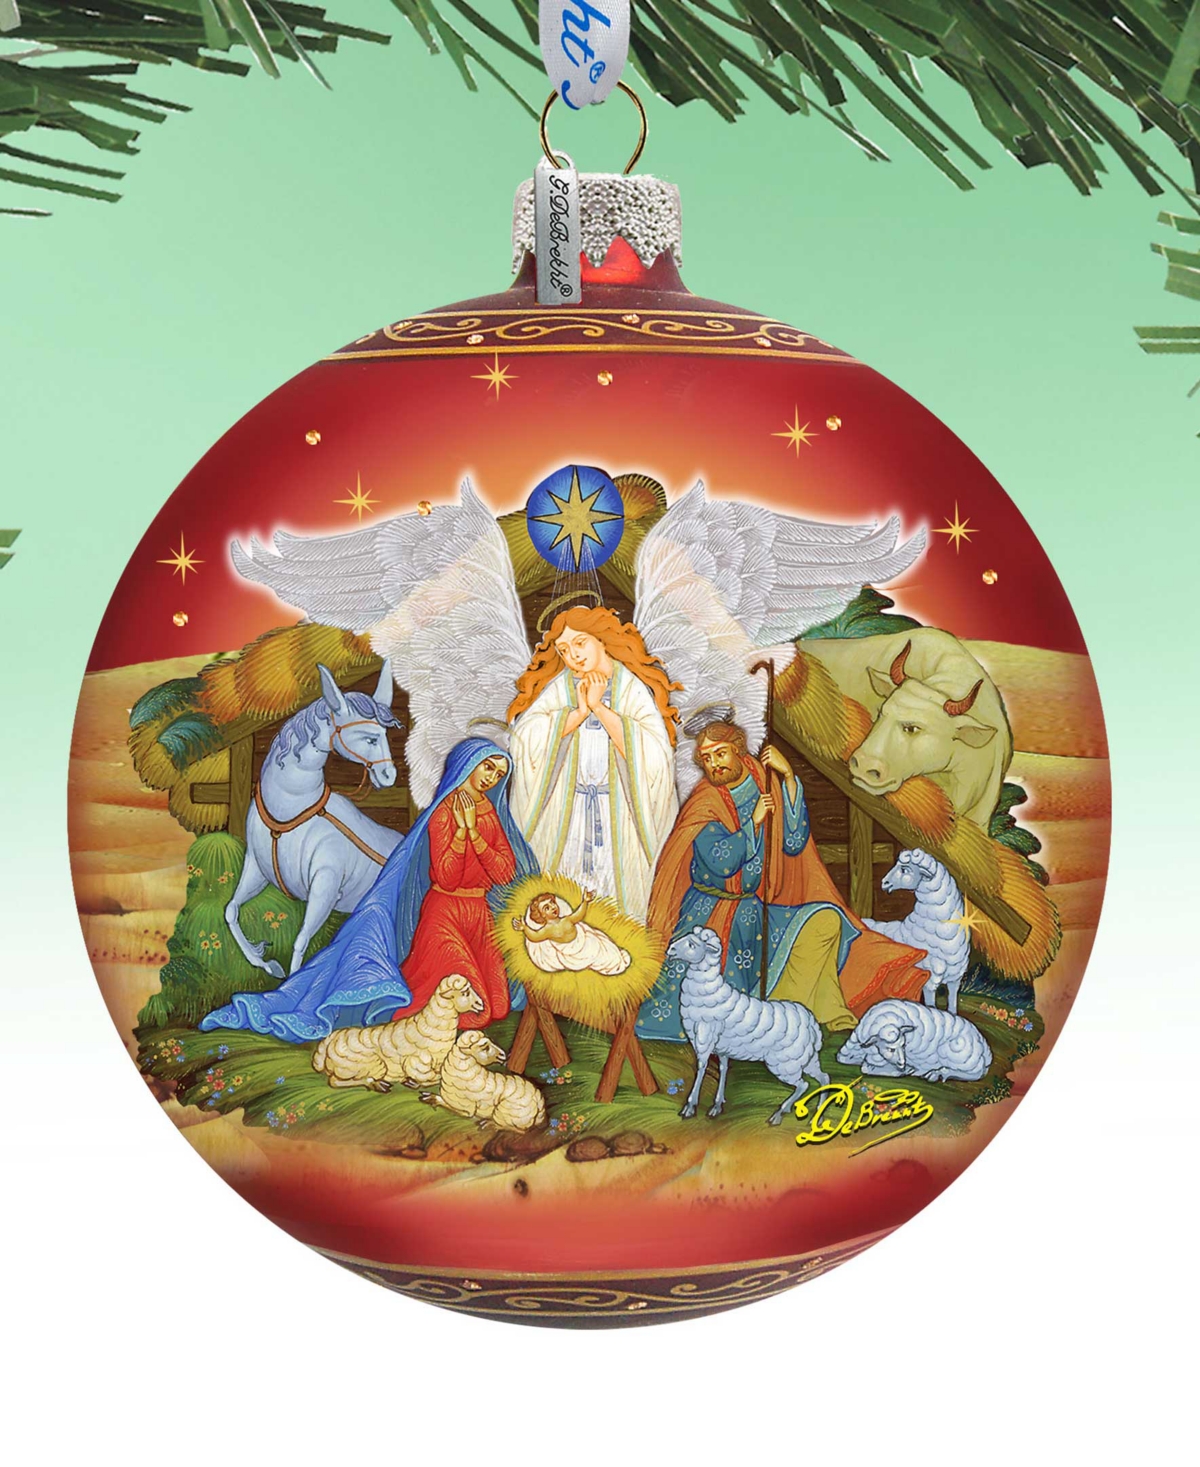 Designocracy Guarding Light Nativity Large Holiday Glass Collectible Ornaments G. Debrekht In Multi Color